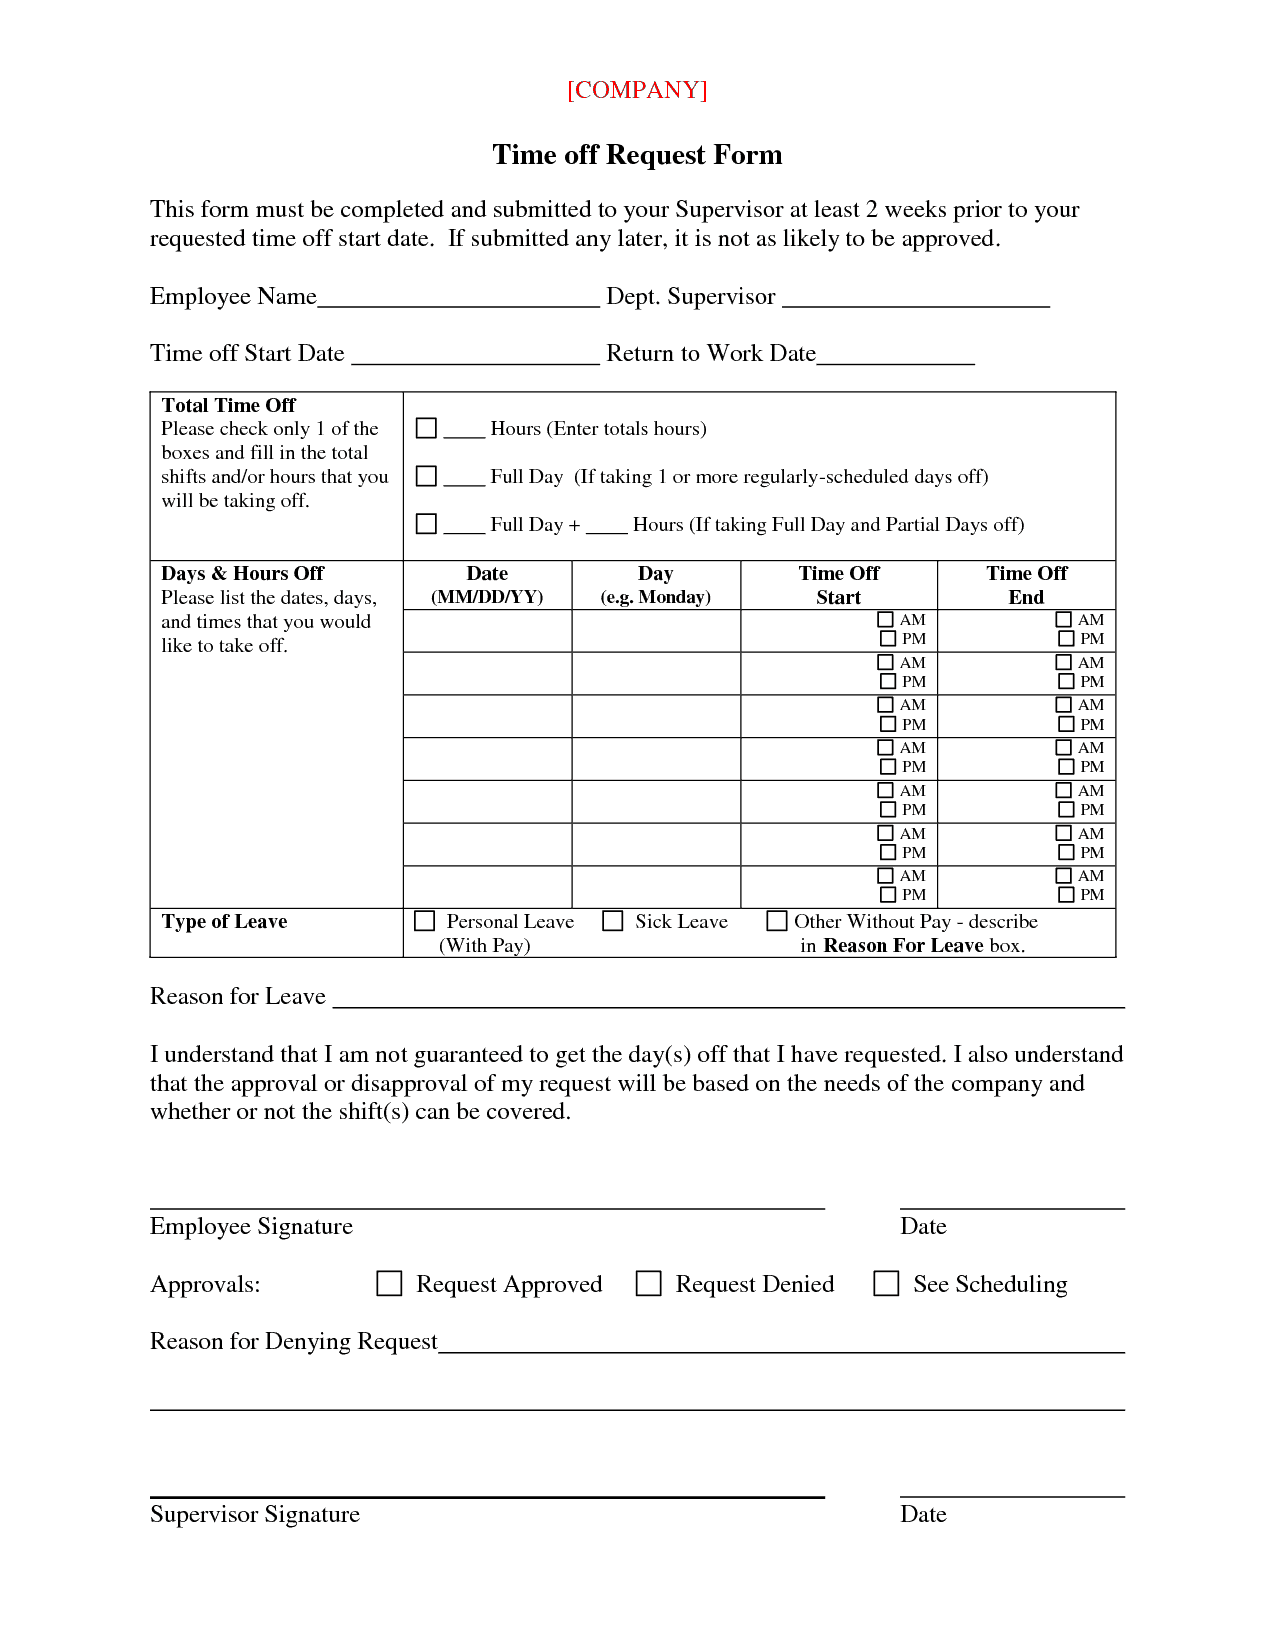 time off request form template 999